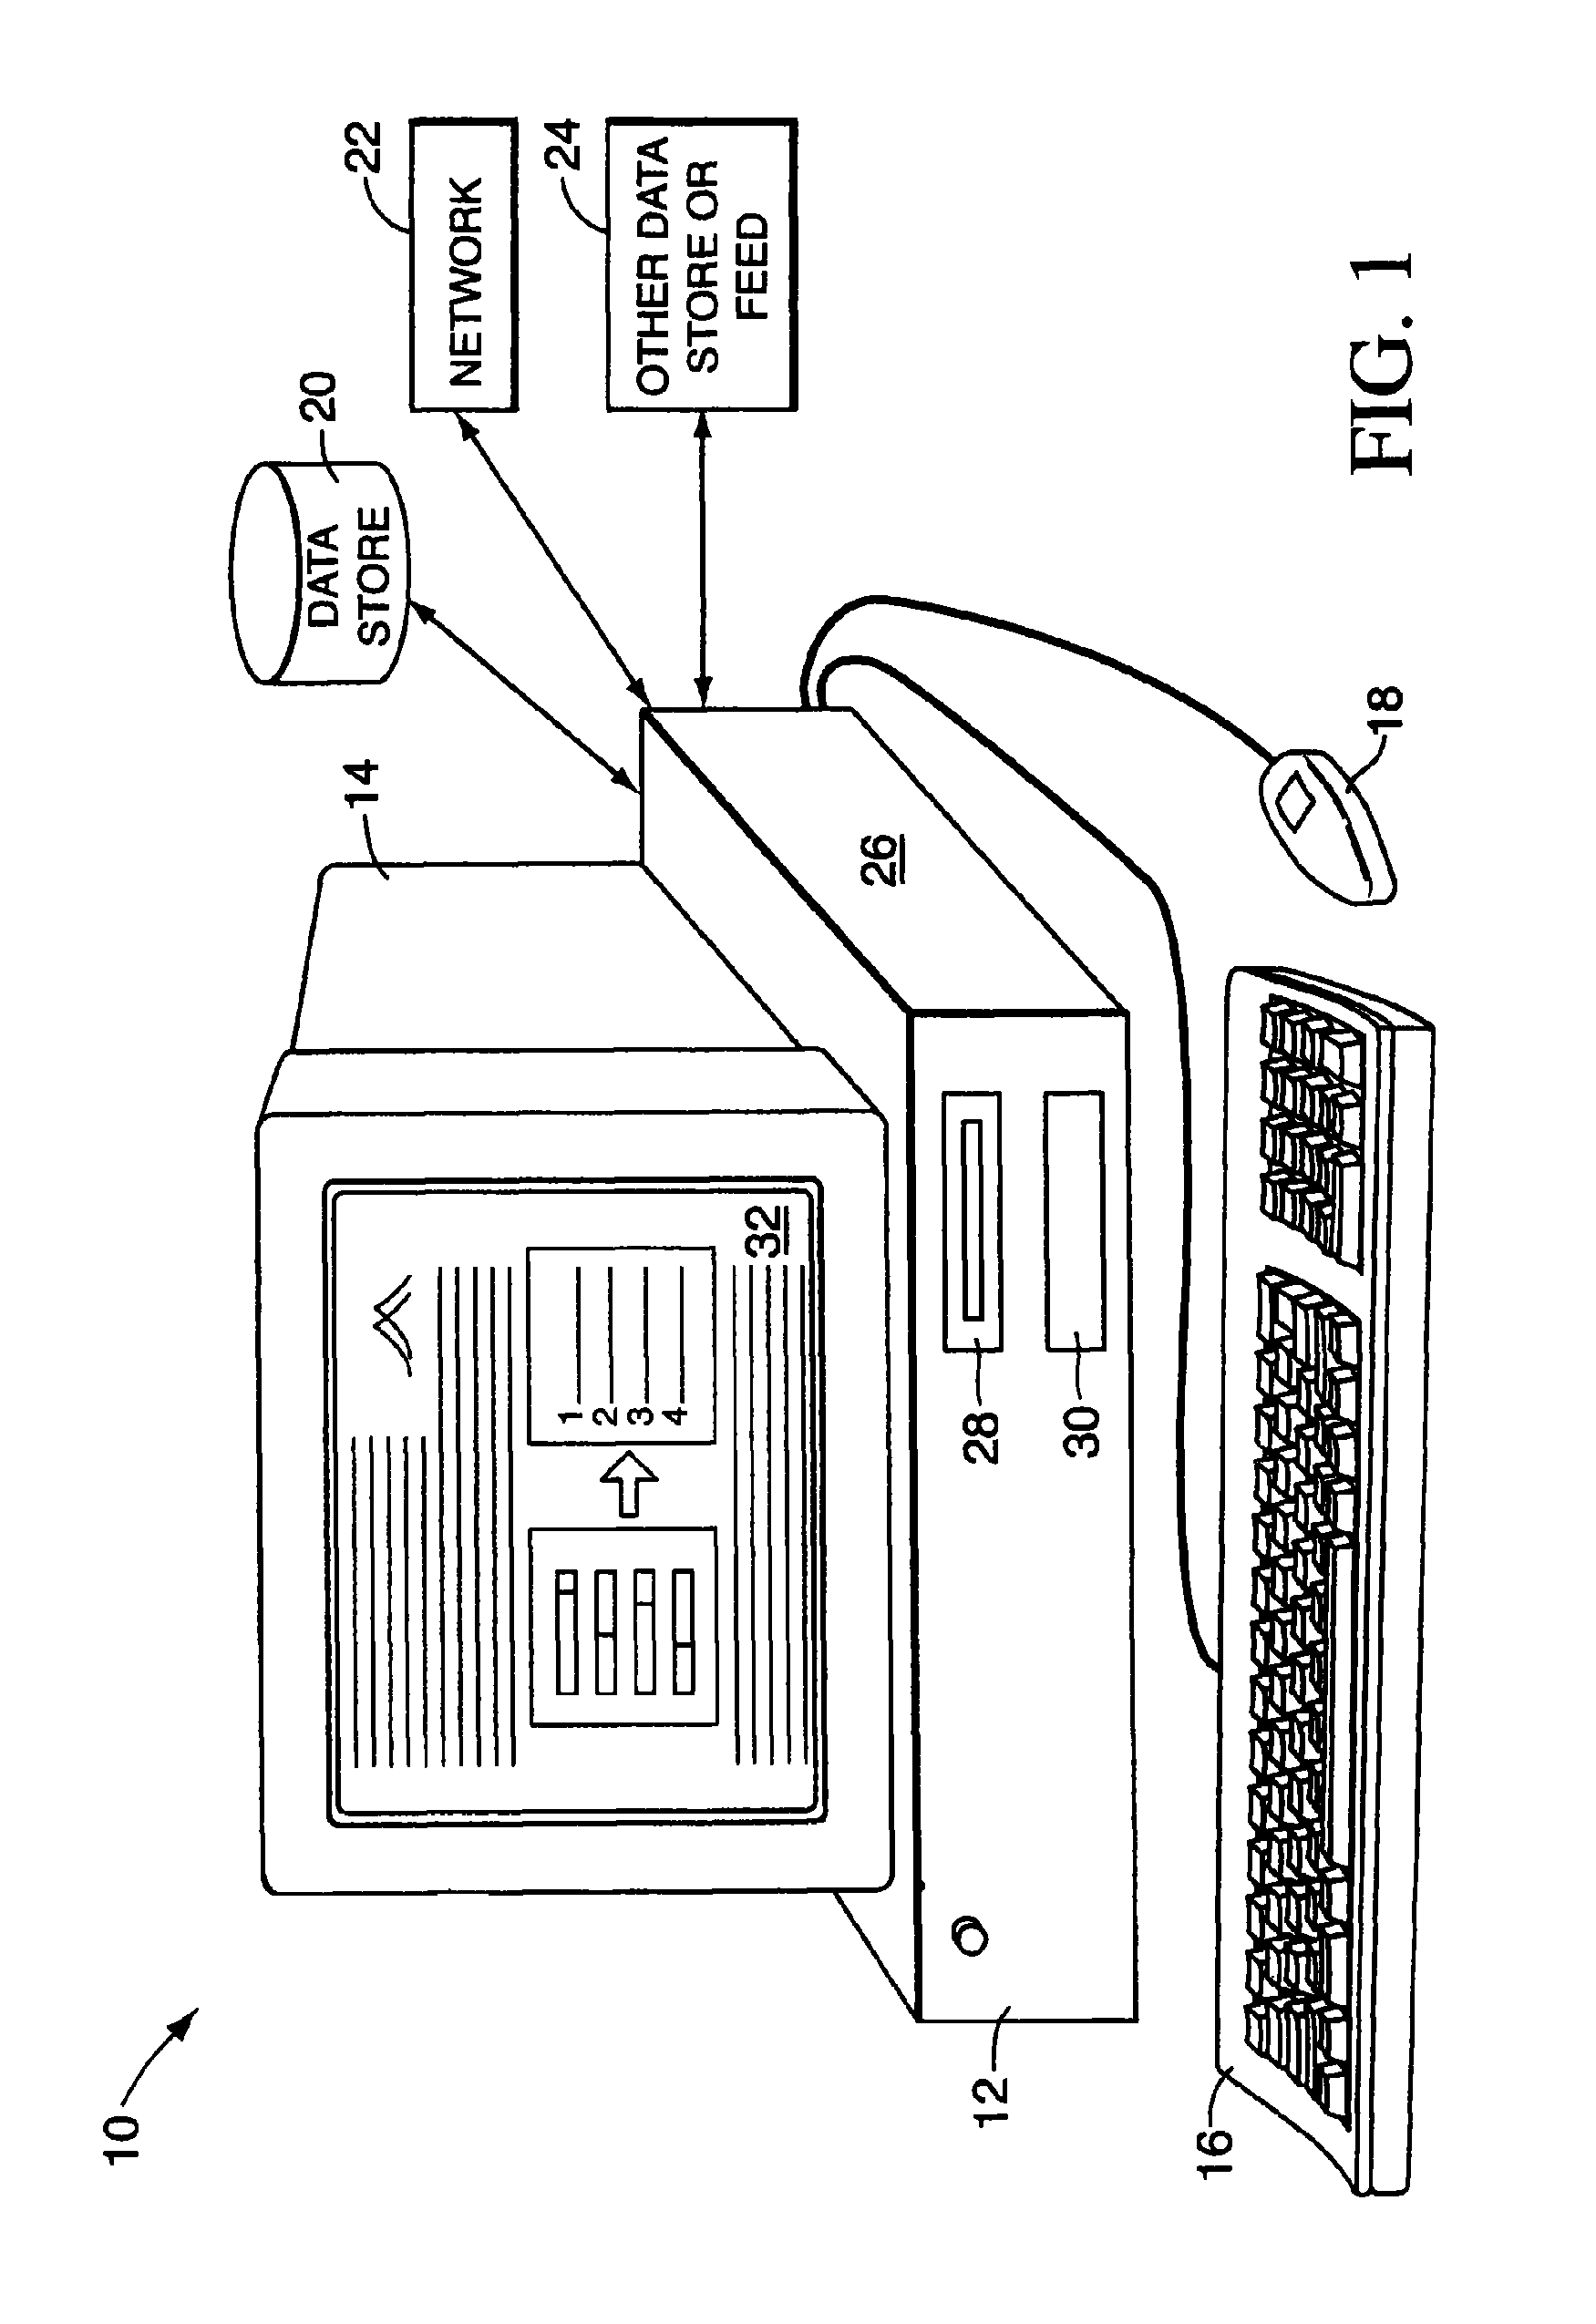 Weighted preference inference system and method